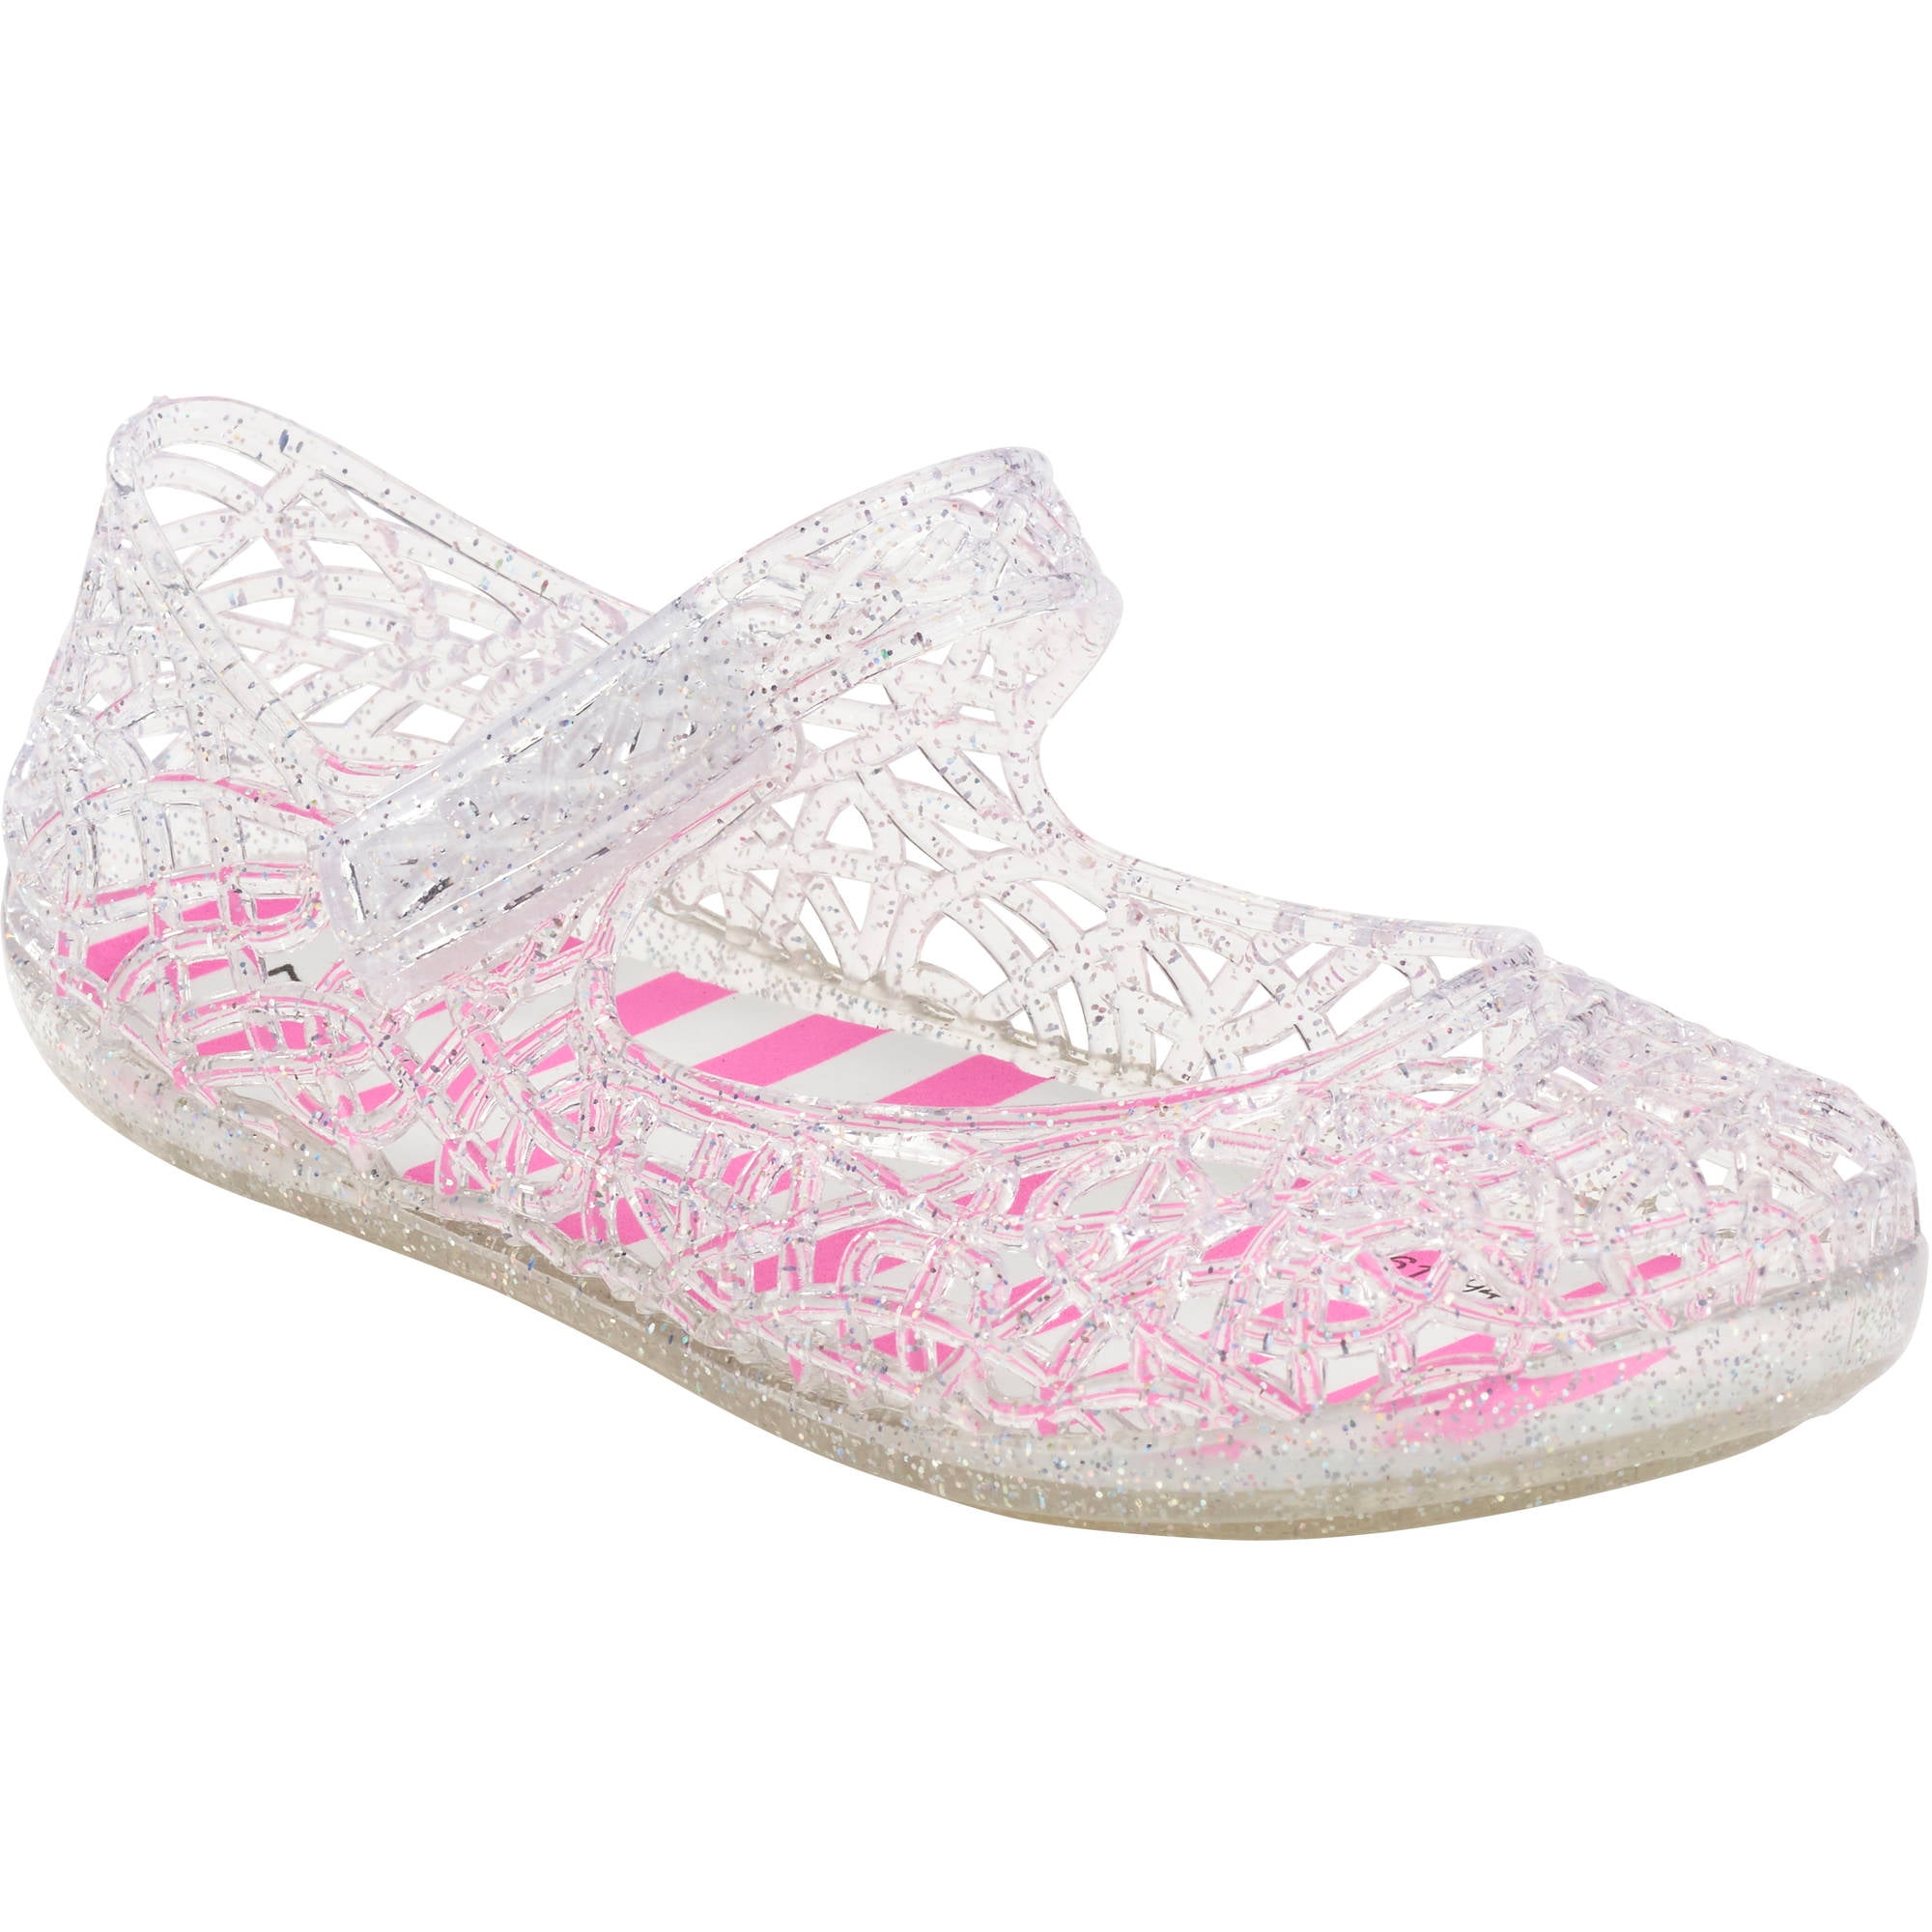 Garanimals  Toddler Girls Mary Jane Clear  Jelly shoes Sizes 4,5,6 